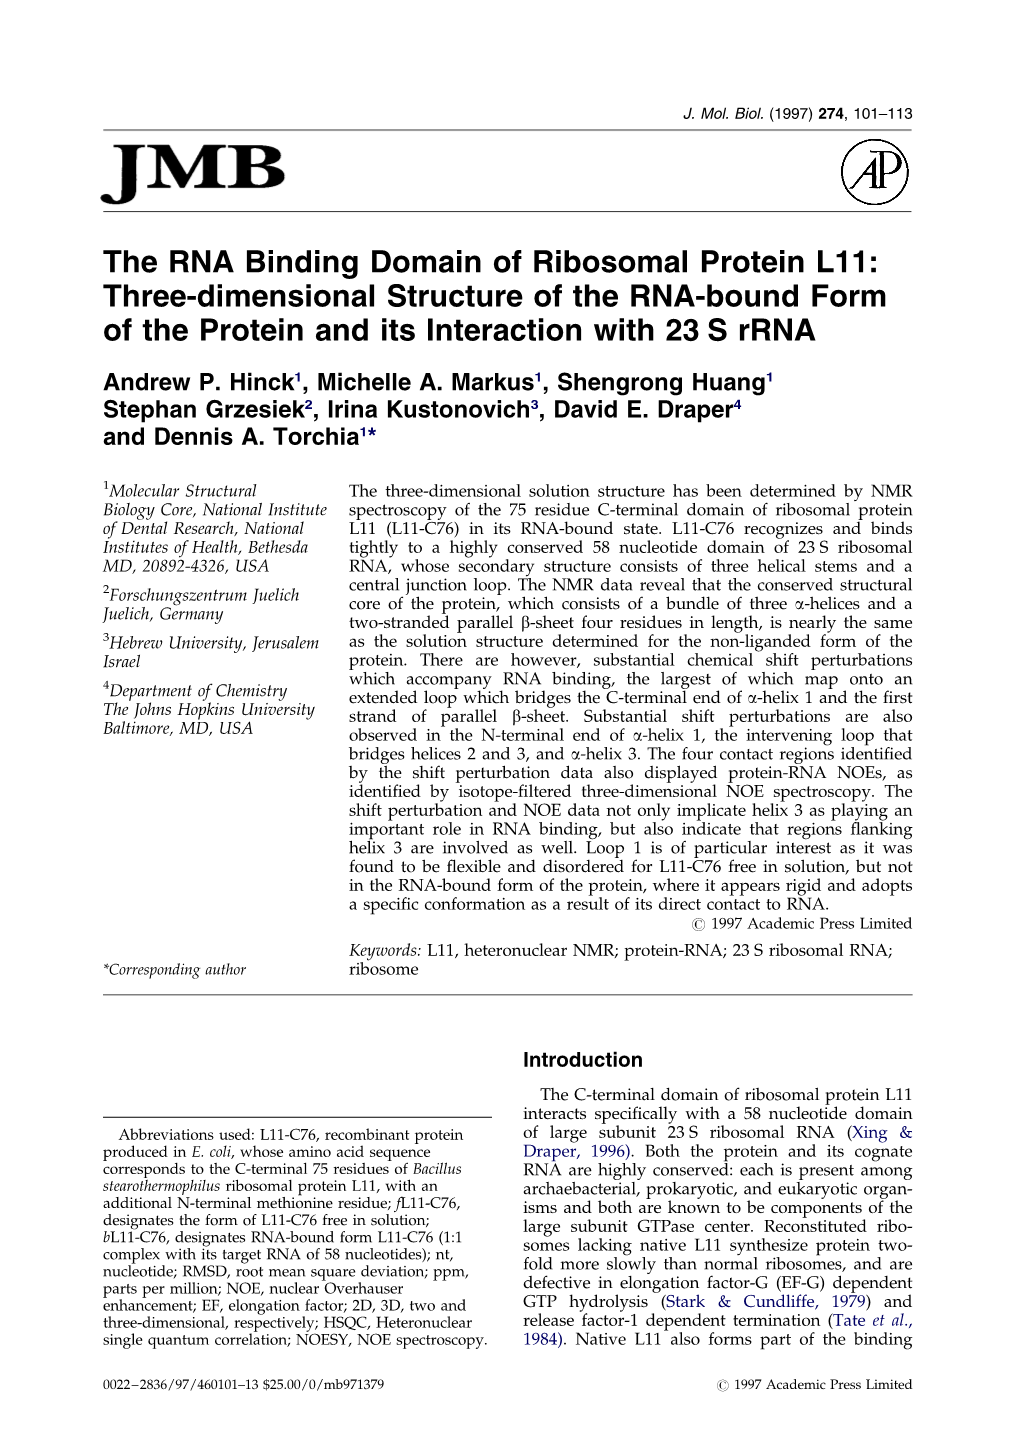 The RNA Binding Domain of Ribosomal Protein L11: Three-Dimensional Structure of the RNA-Bound Form of the Protein and Its Interaction with 23 S Rrna